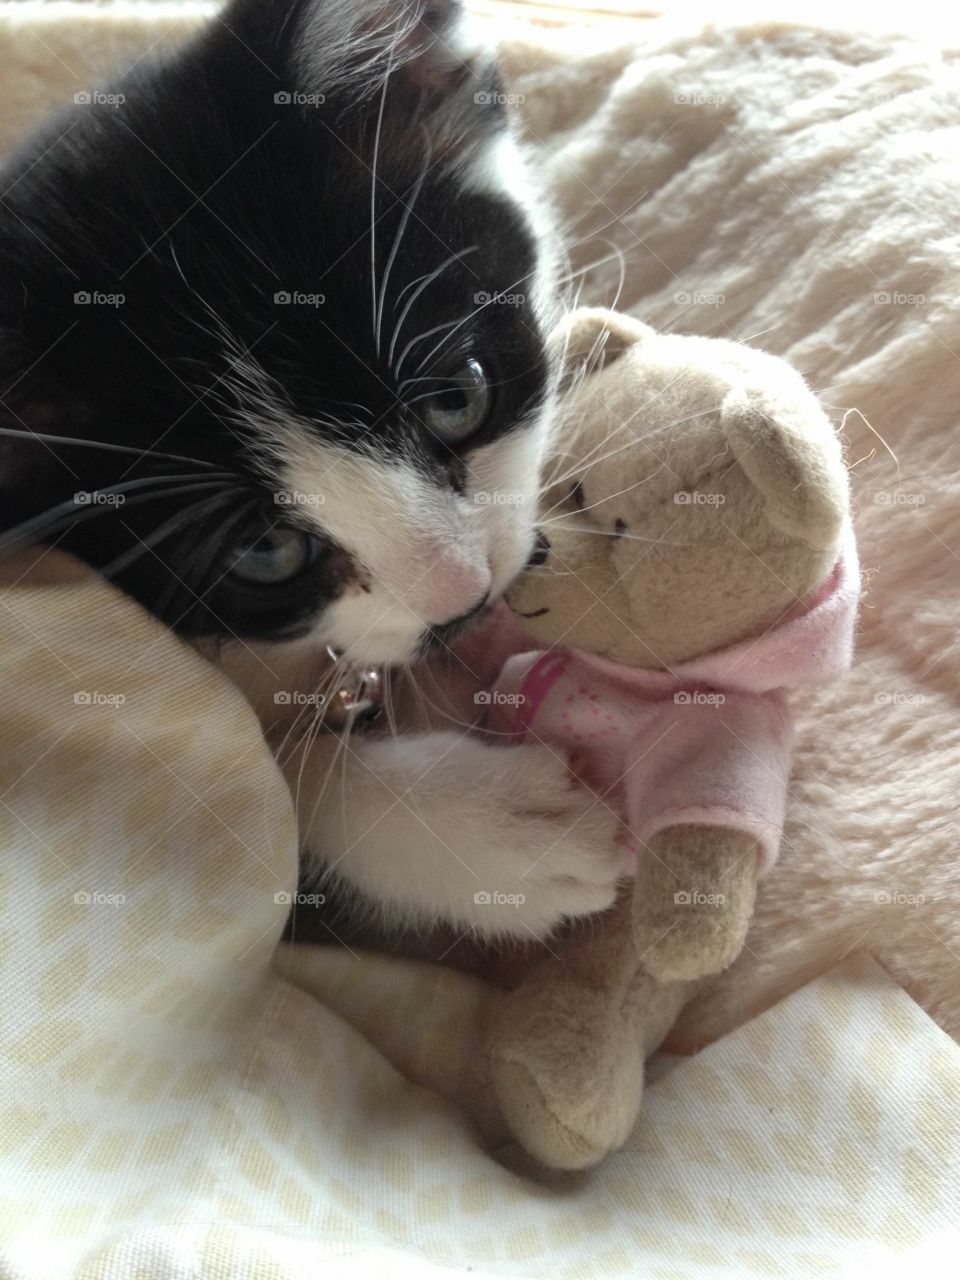 My baby Lily cuddling with her favorite stuffed animal